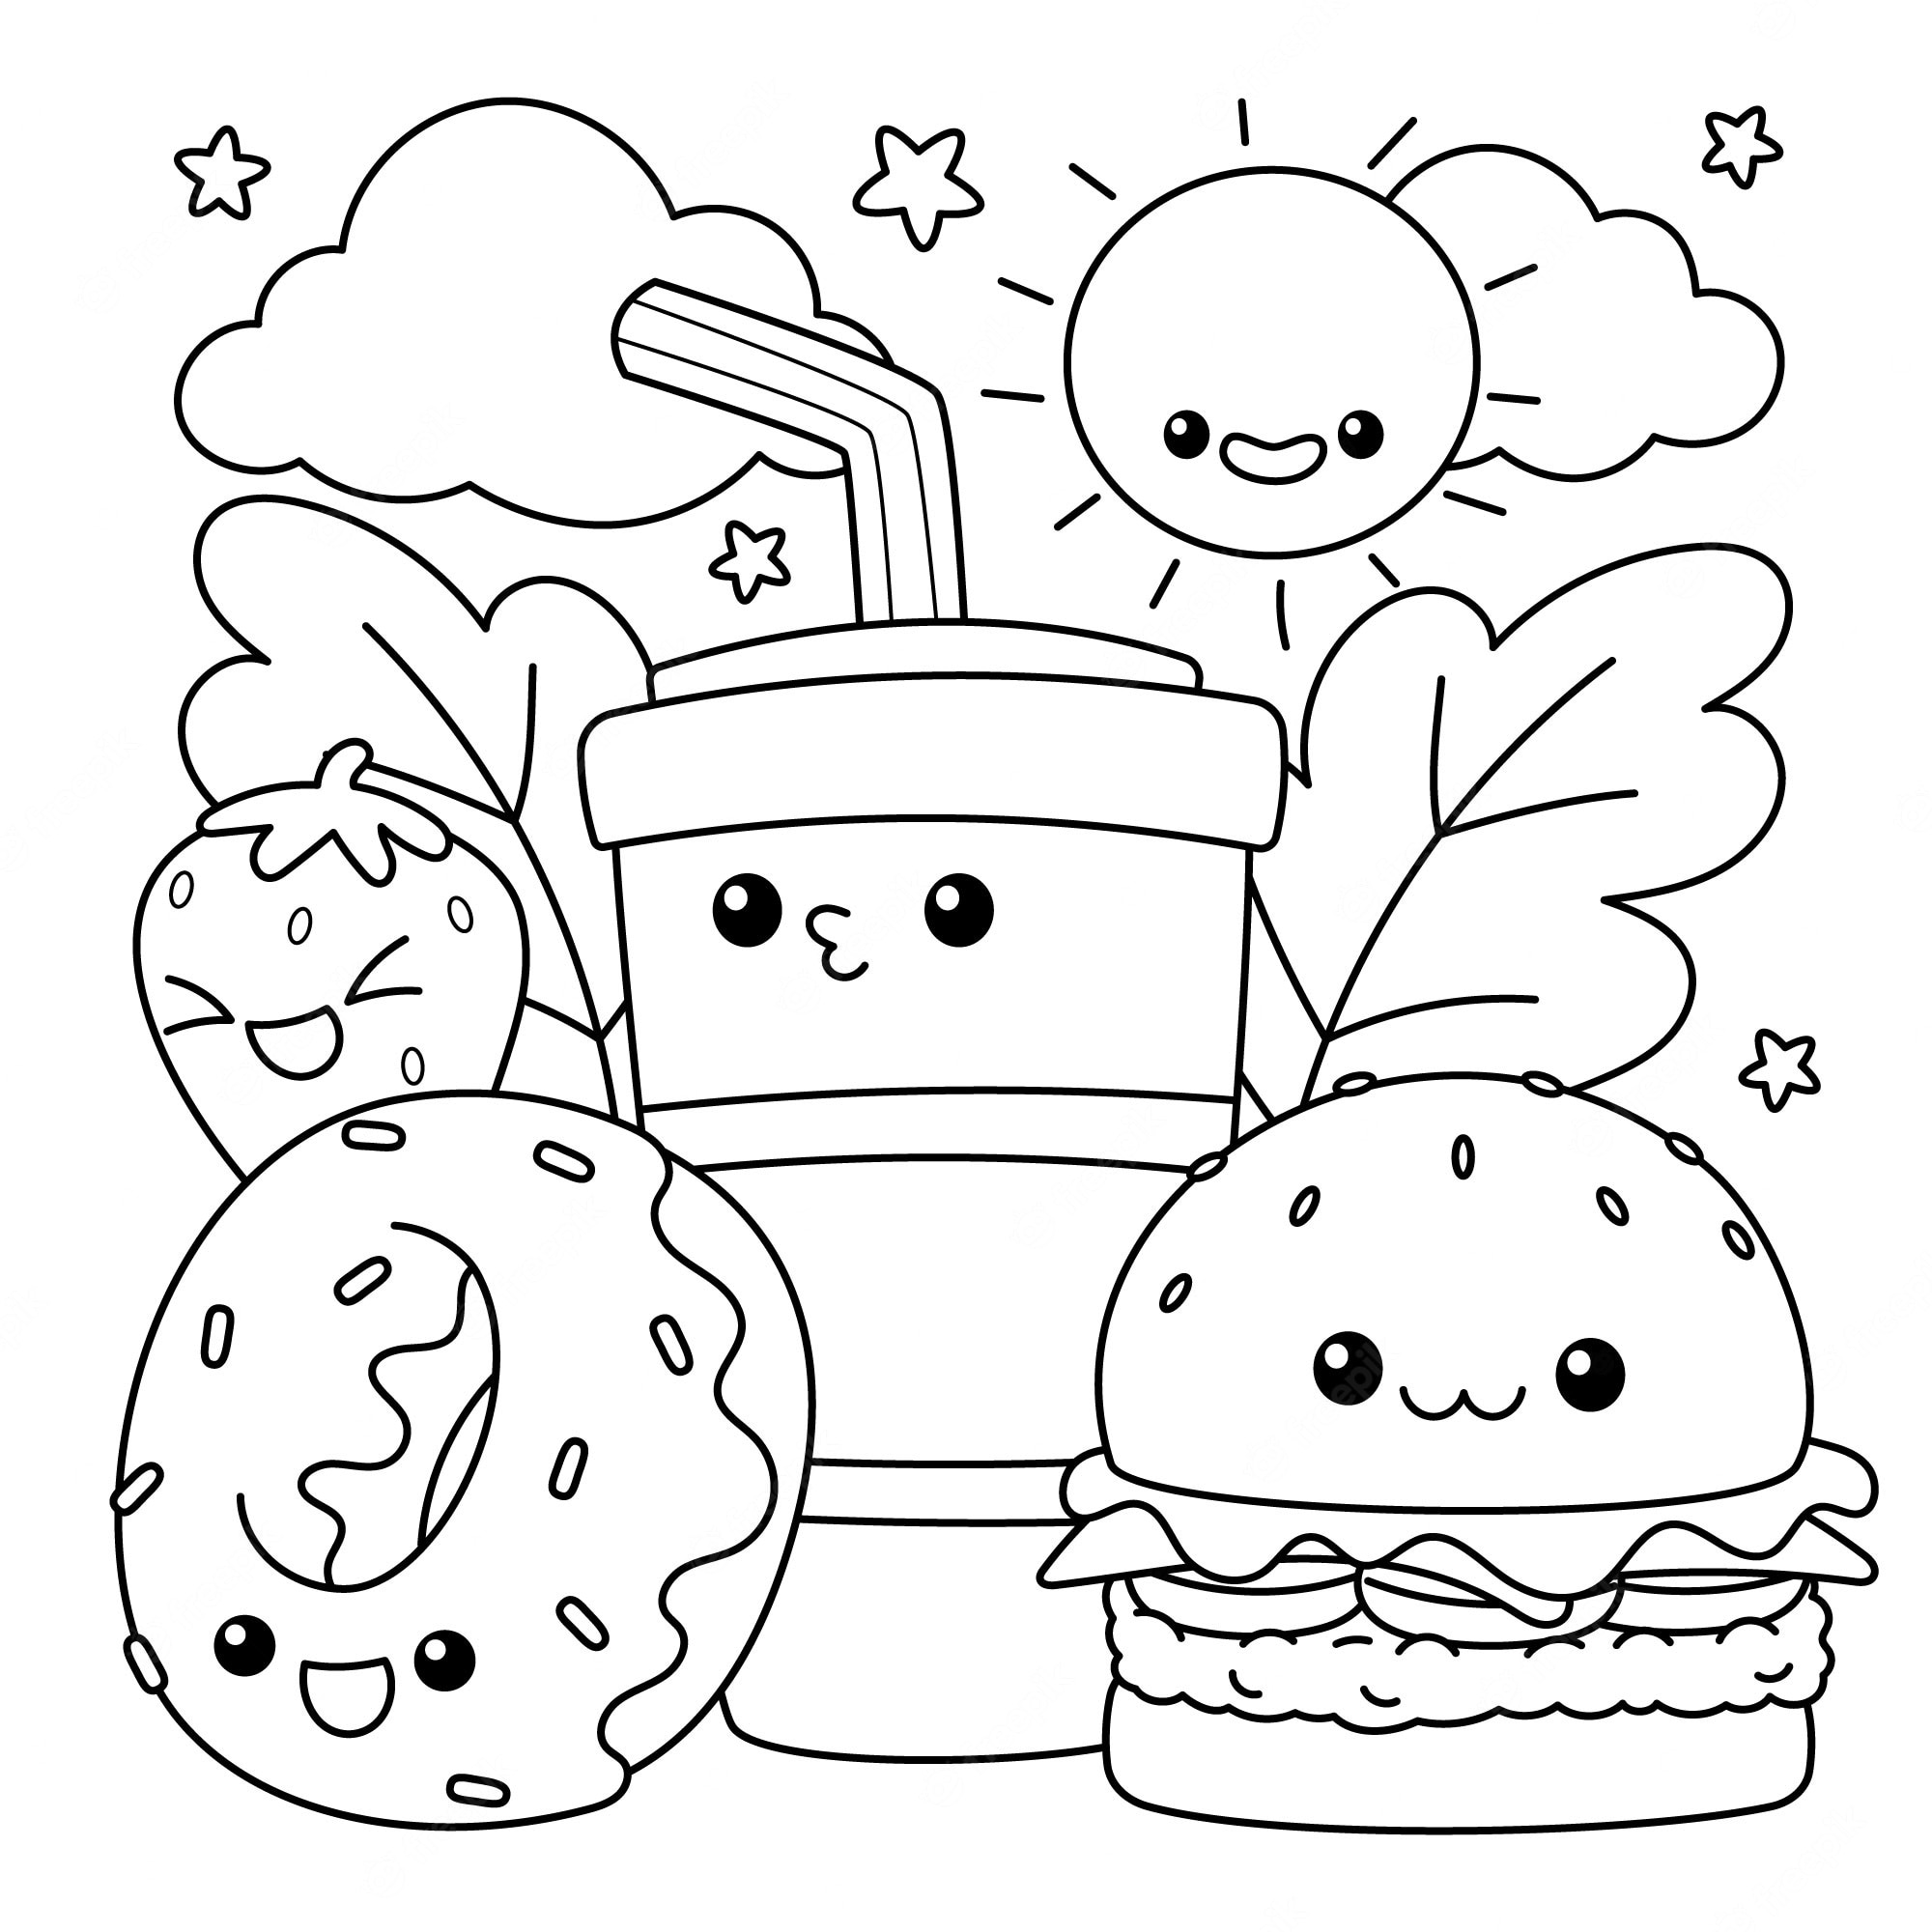 Cute Foods Coloring Pages Free - Coloring Home